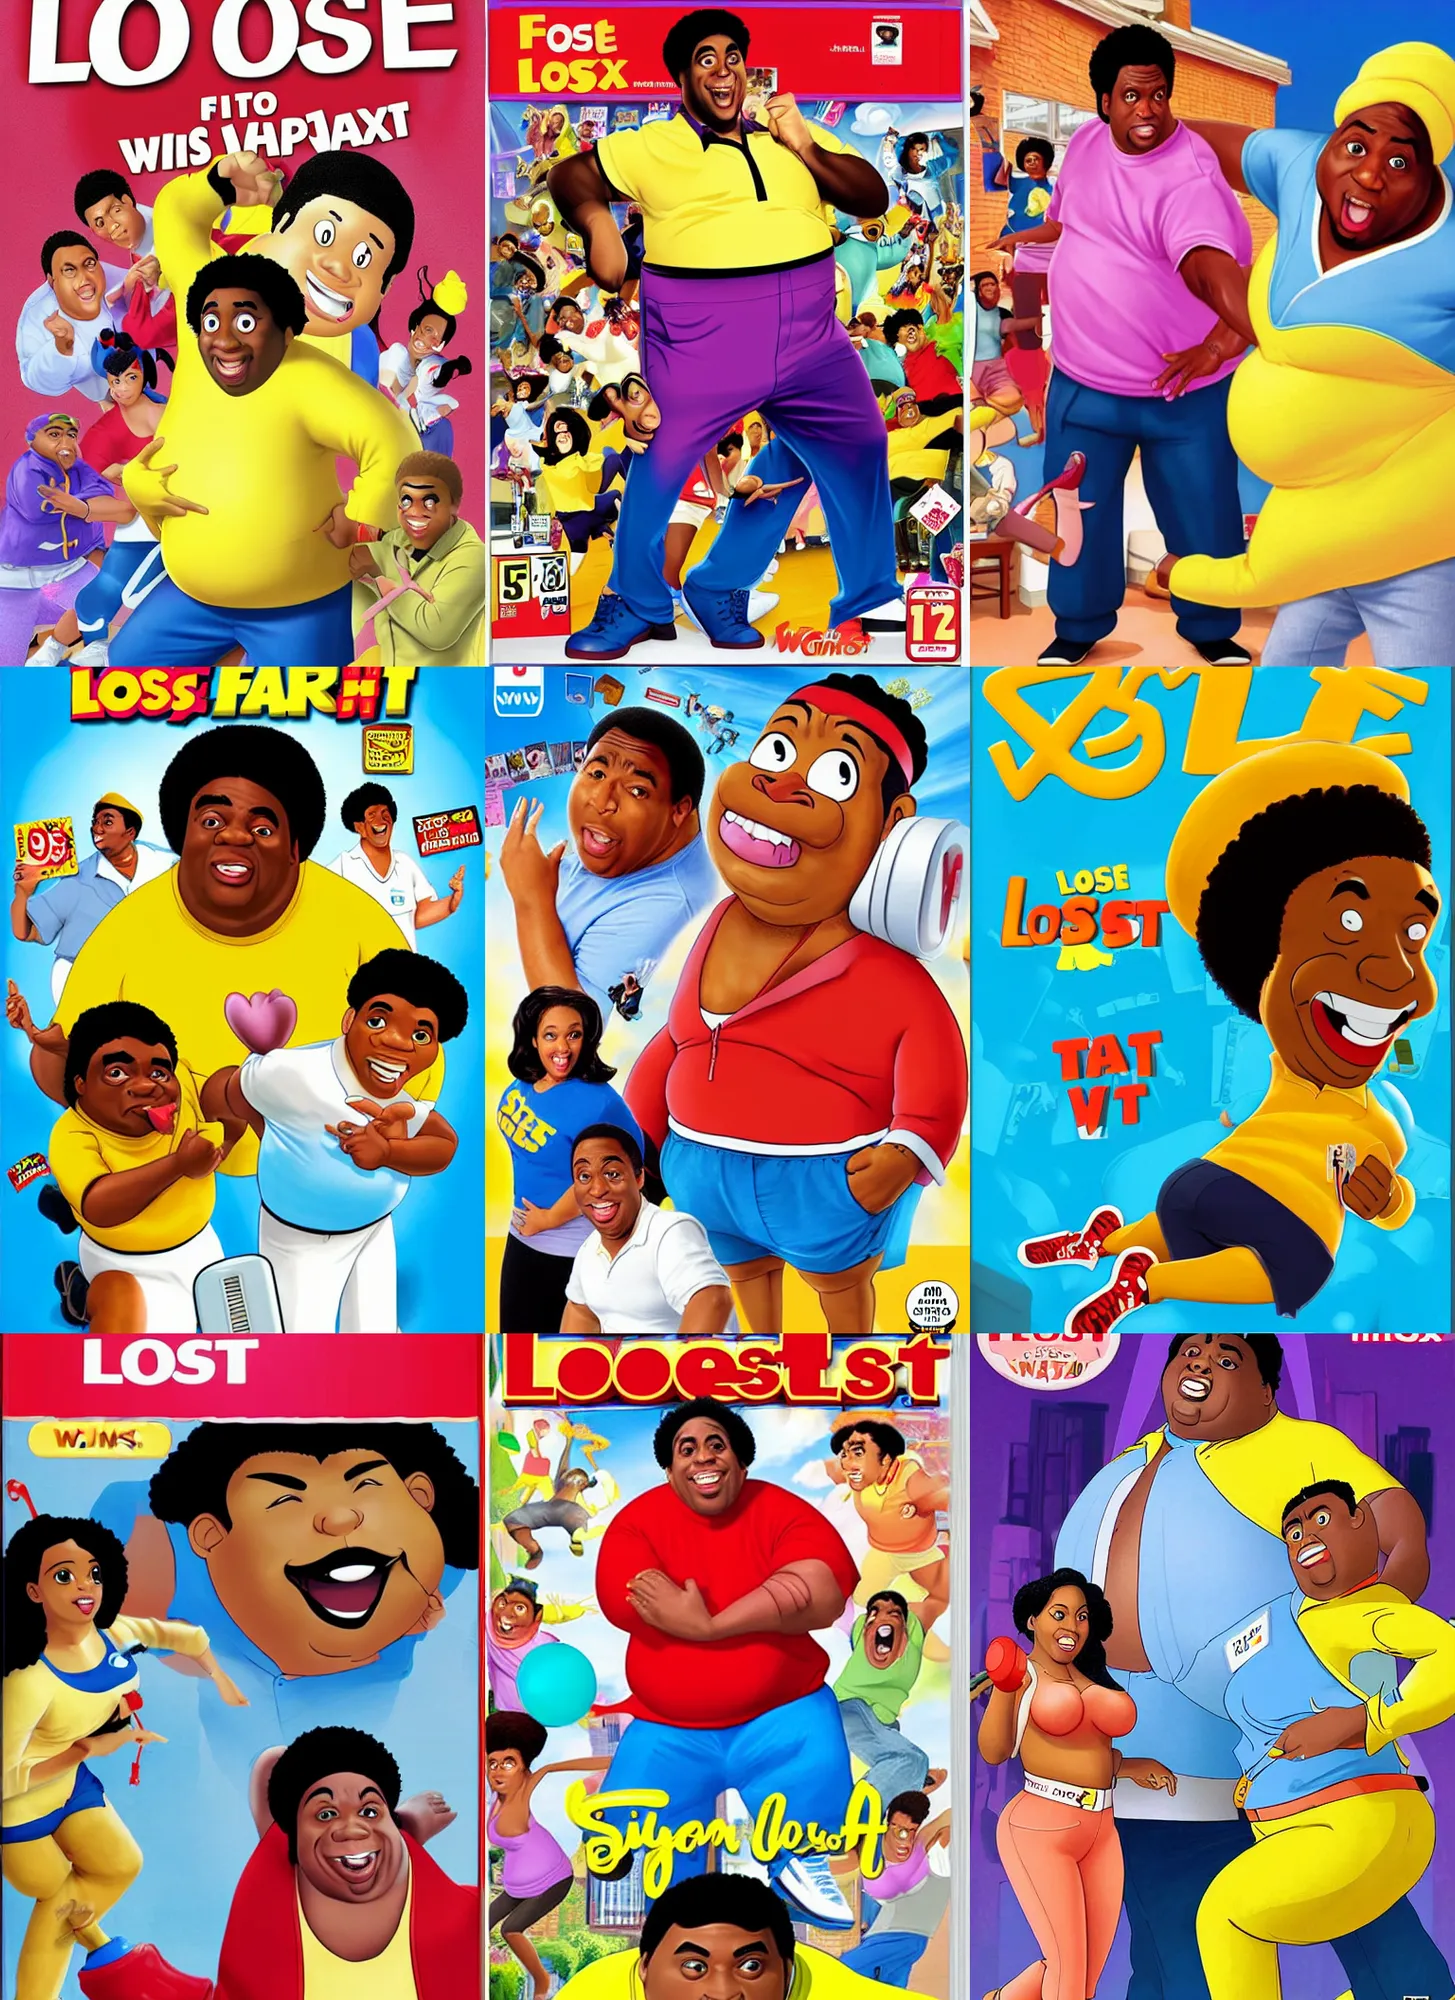 Prompt: box art of lose it! with fat albert ( 2 0 0 5 ) for wii, featuring kenan thompson as fat albert, sweating, exercising, wii console game cover art